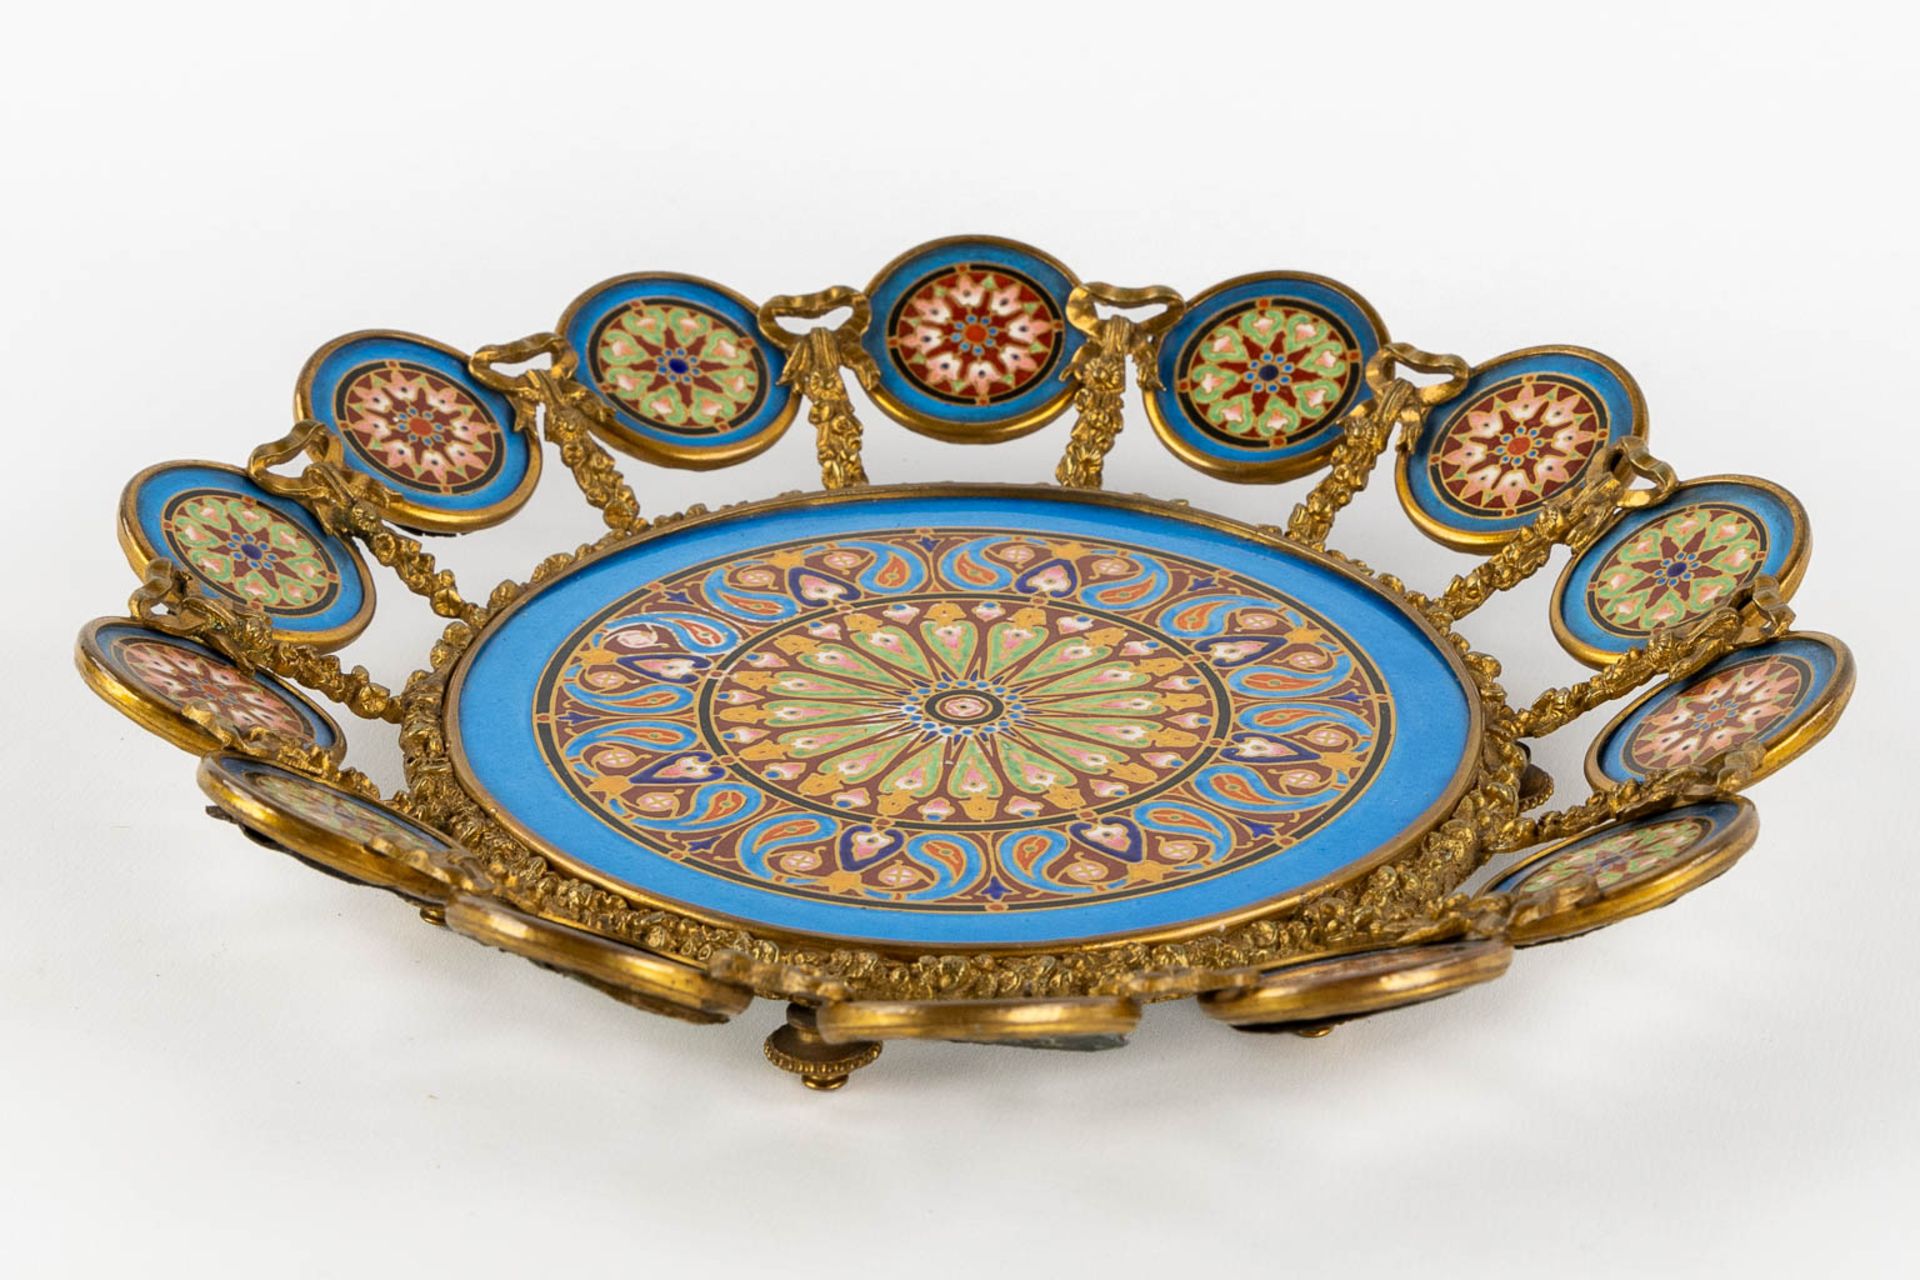 A highly decorative serving plate, gilt bronze mounted with hand-painted porcelain plaques, 19th C. - Image 8 of 8